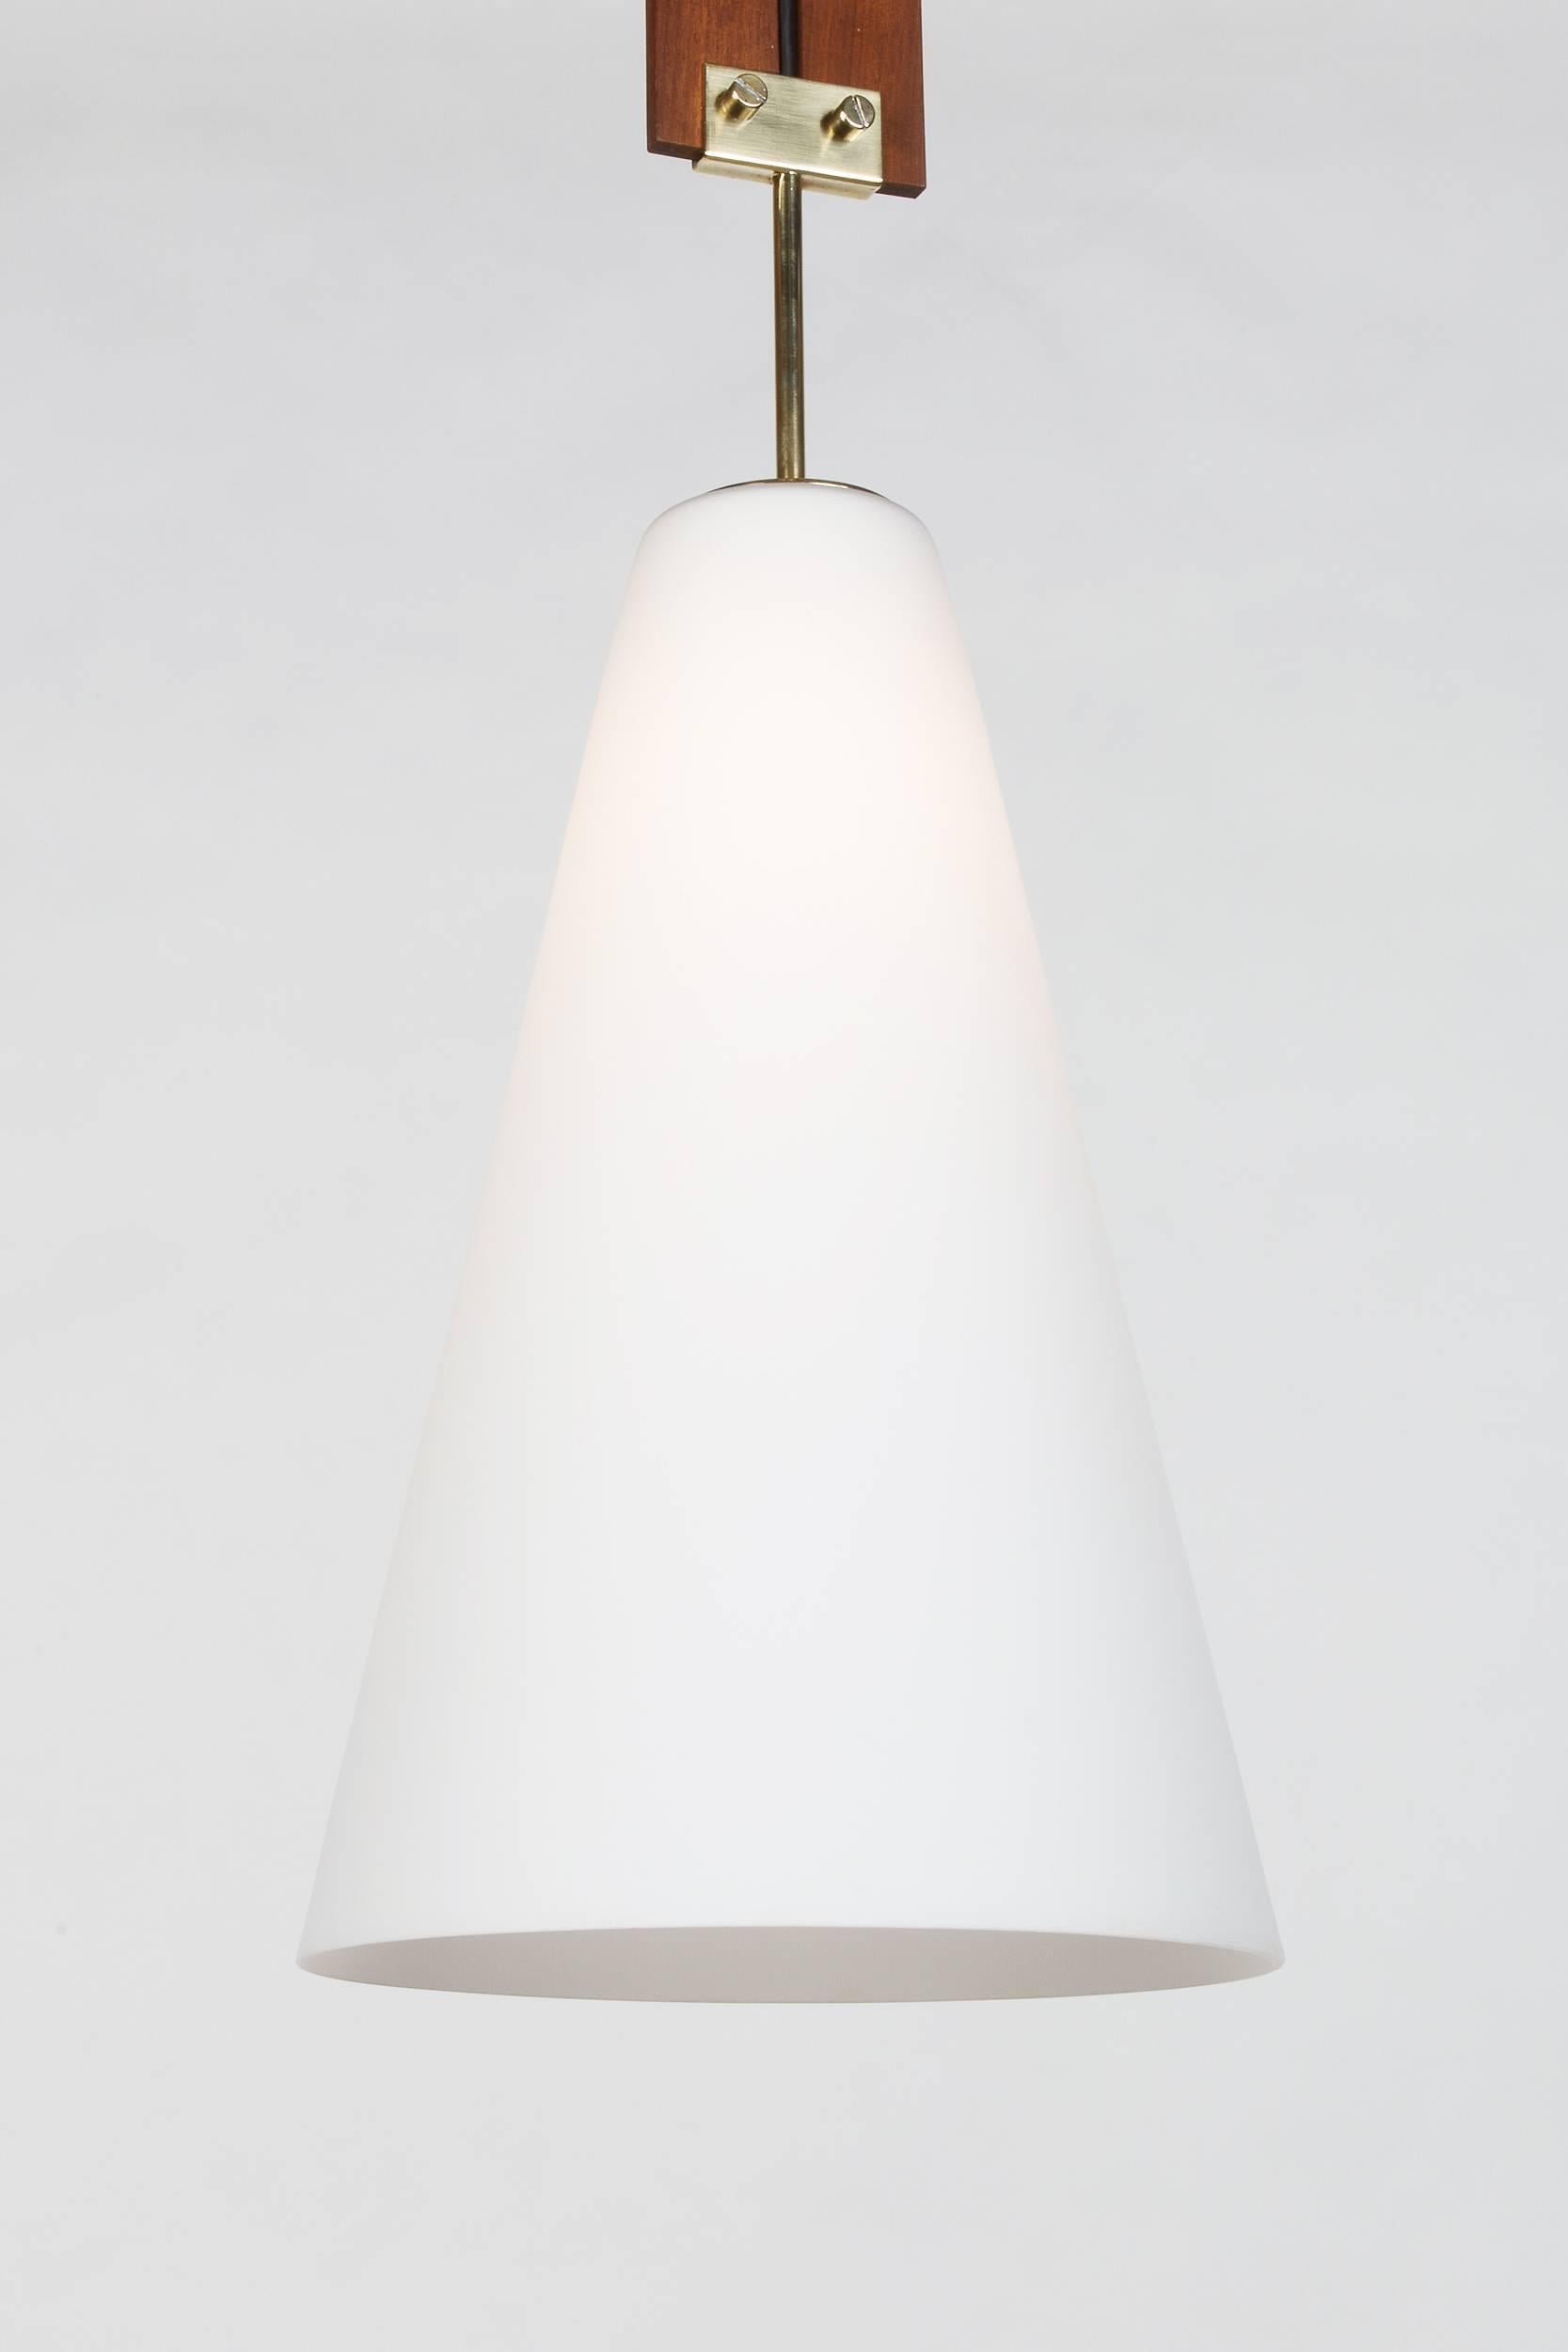 Italian pendant mounted on two mahogany rails, small series production of the 1960s. Cone-shaped shade made of opaline glass, beautiful brass details. This small shaped pendant is perfect above a dining table or in an entrance with high ceiling.